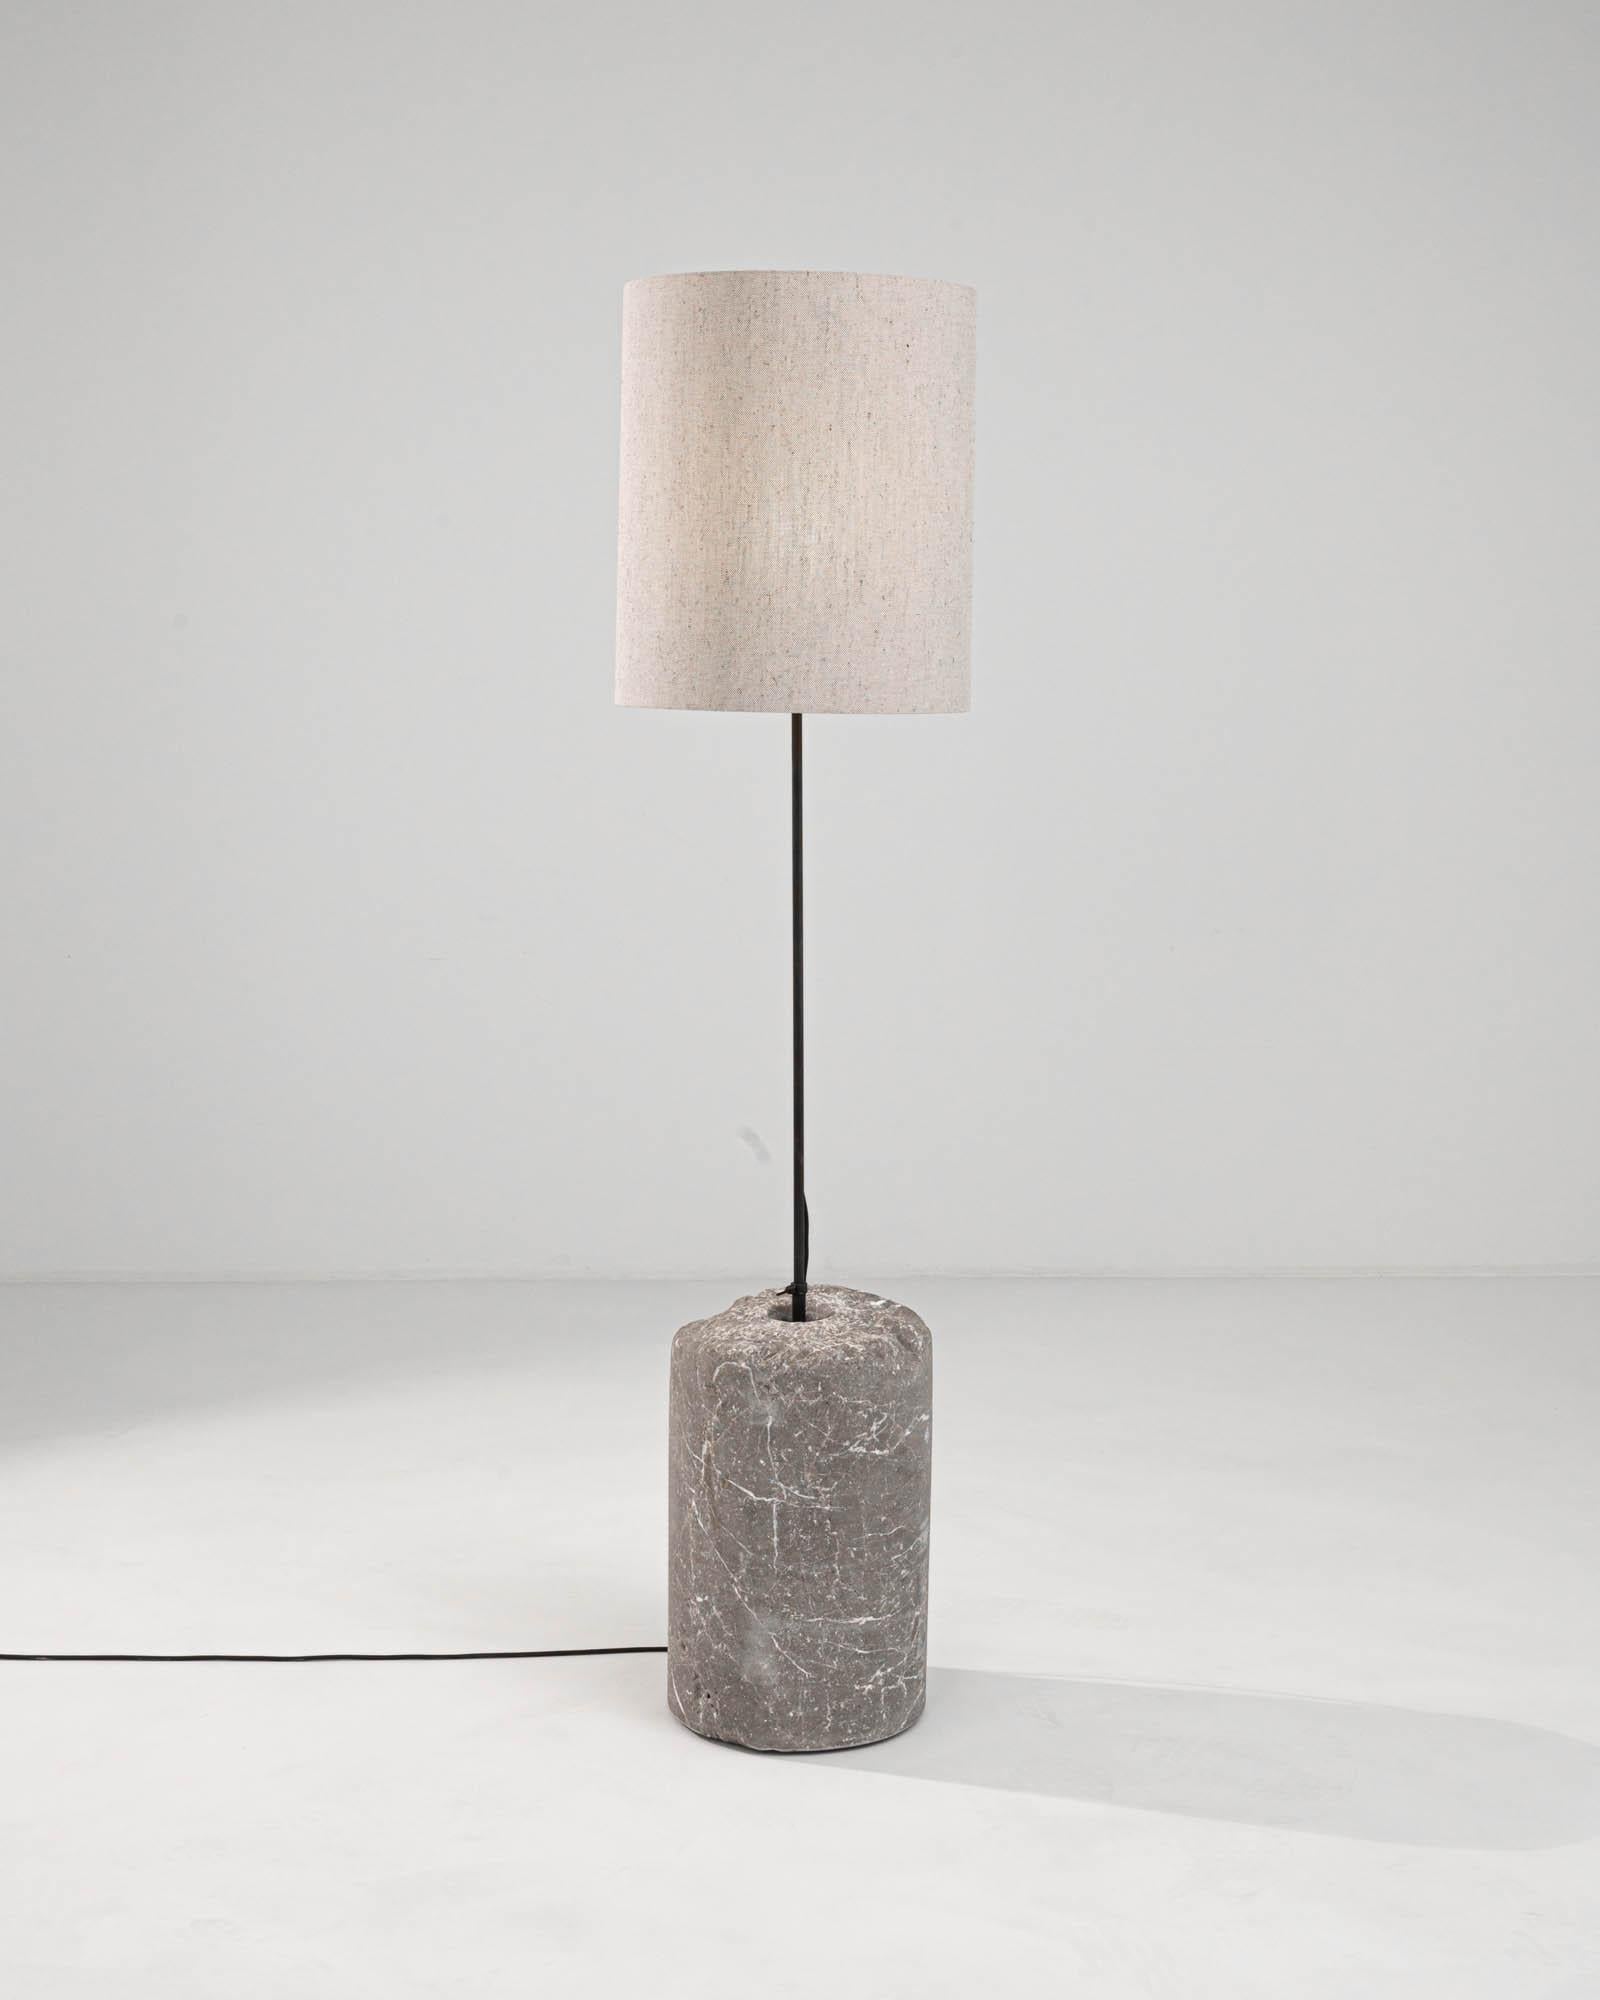 Introducing our early 1900s-inspired European Marble & Metal Floor Lamp, an elegant blend of classic charm and contemporary design. This exquisite piece features a robust, cylindrical base of genuine marble, boasting natural grey veining and